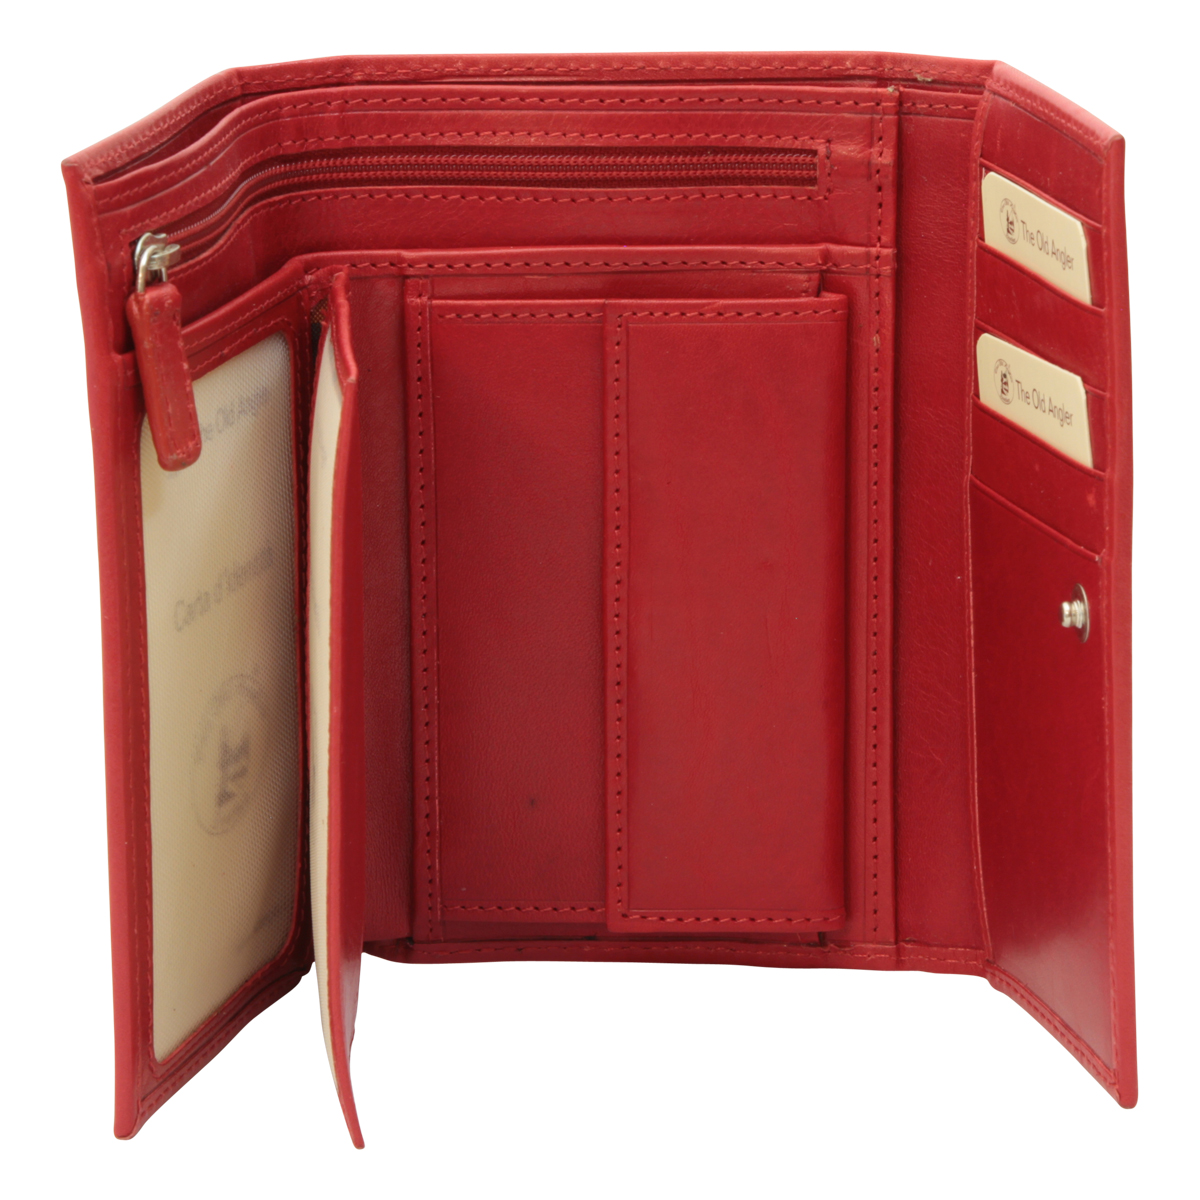 Leather wallet for women - red | 501789RO | EURO | Old Angler Firenze